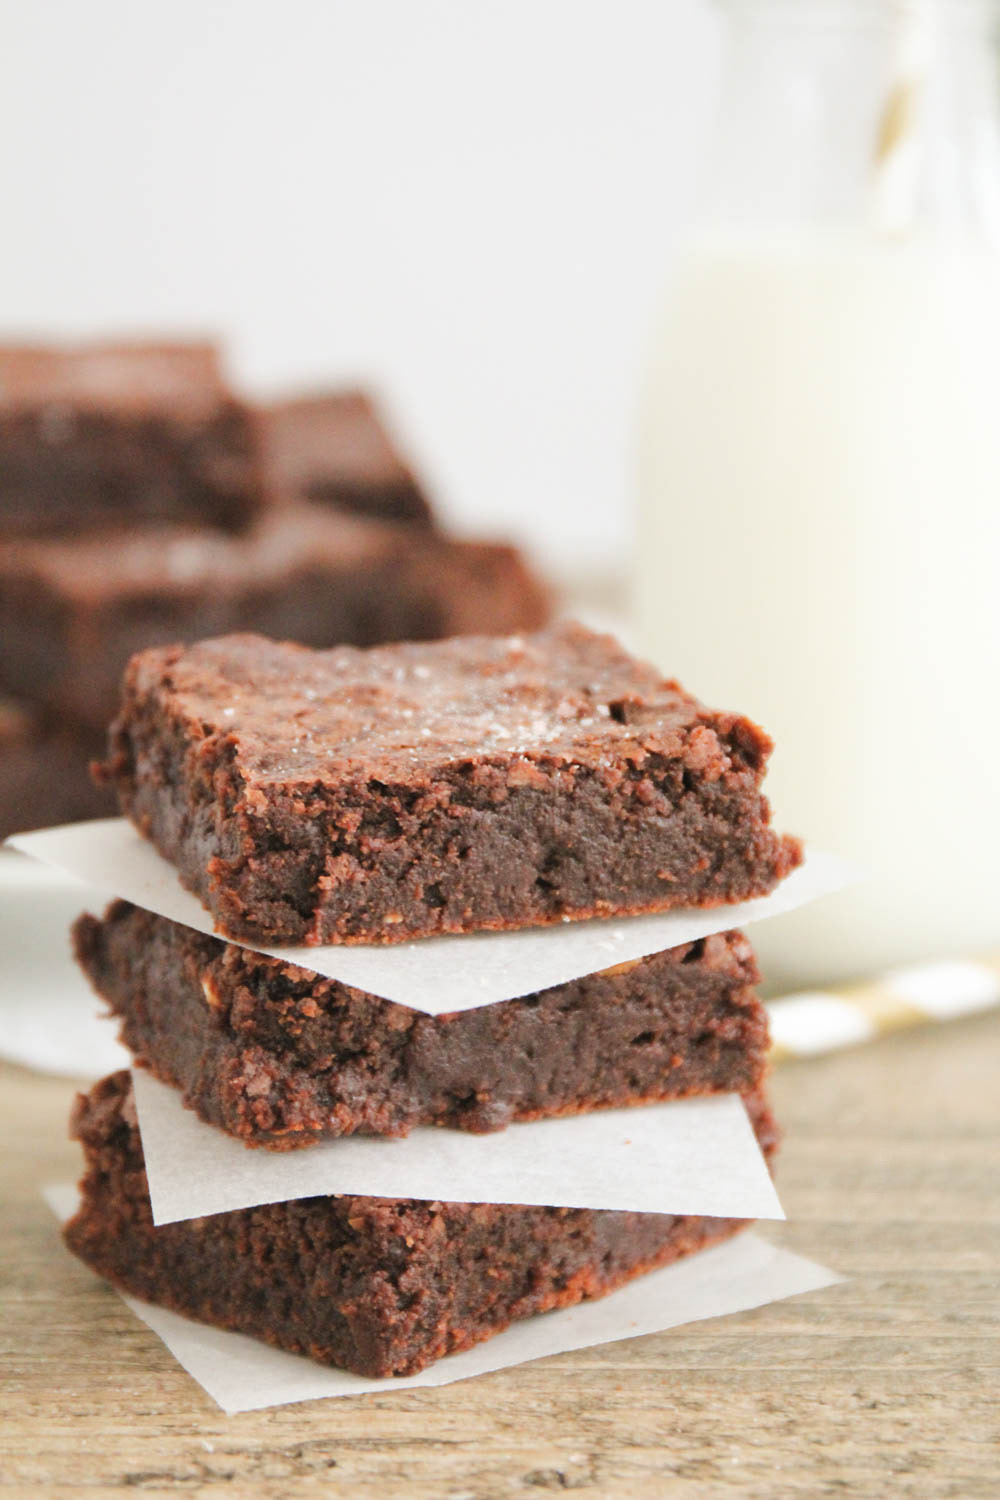 These billionaire brownies are amazing, life-changing, and over the top decadent. So rich and chocolatey, dense and fudgy, and just all around perfect!